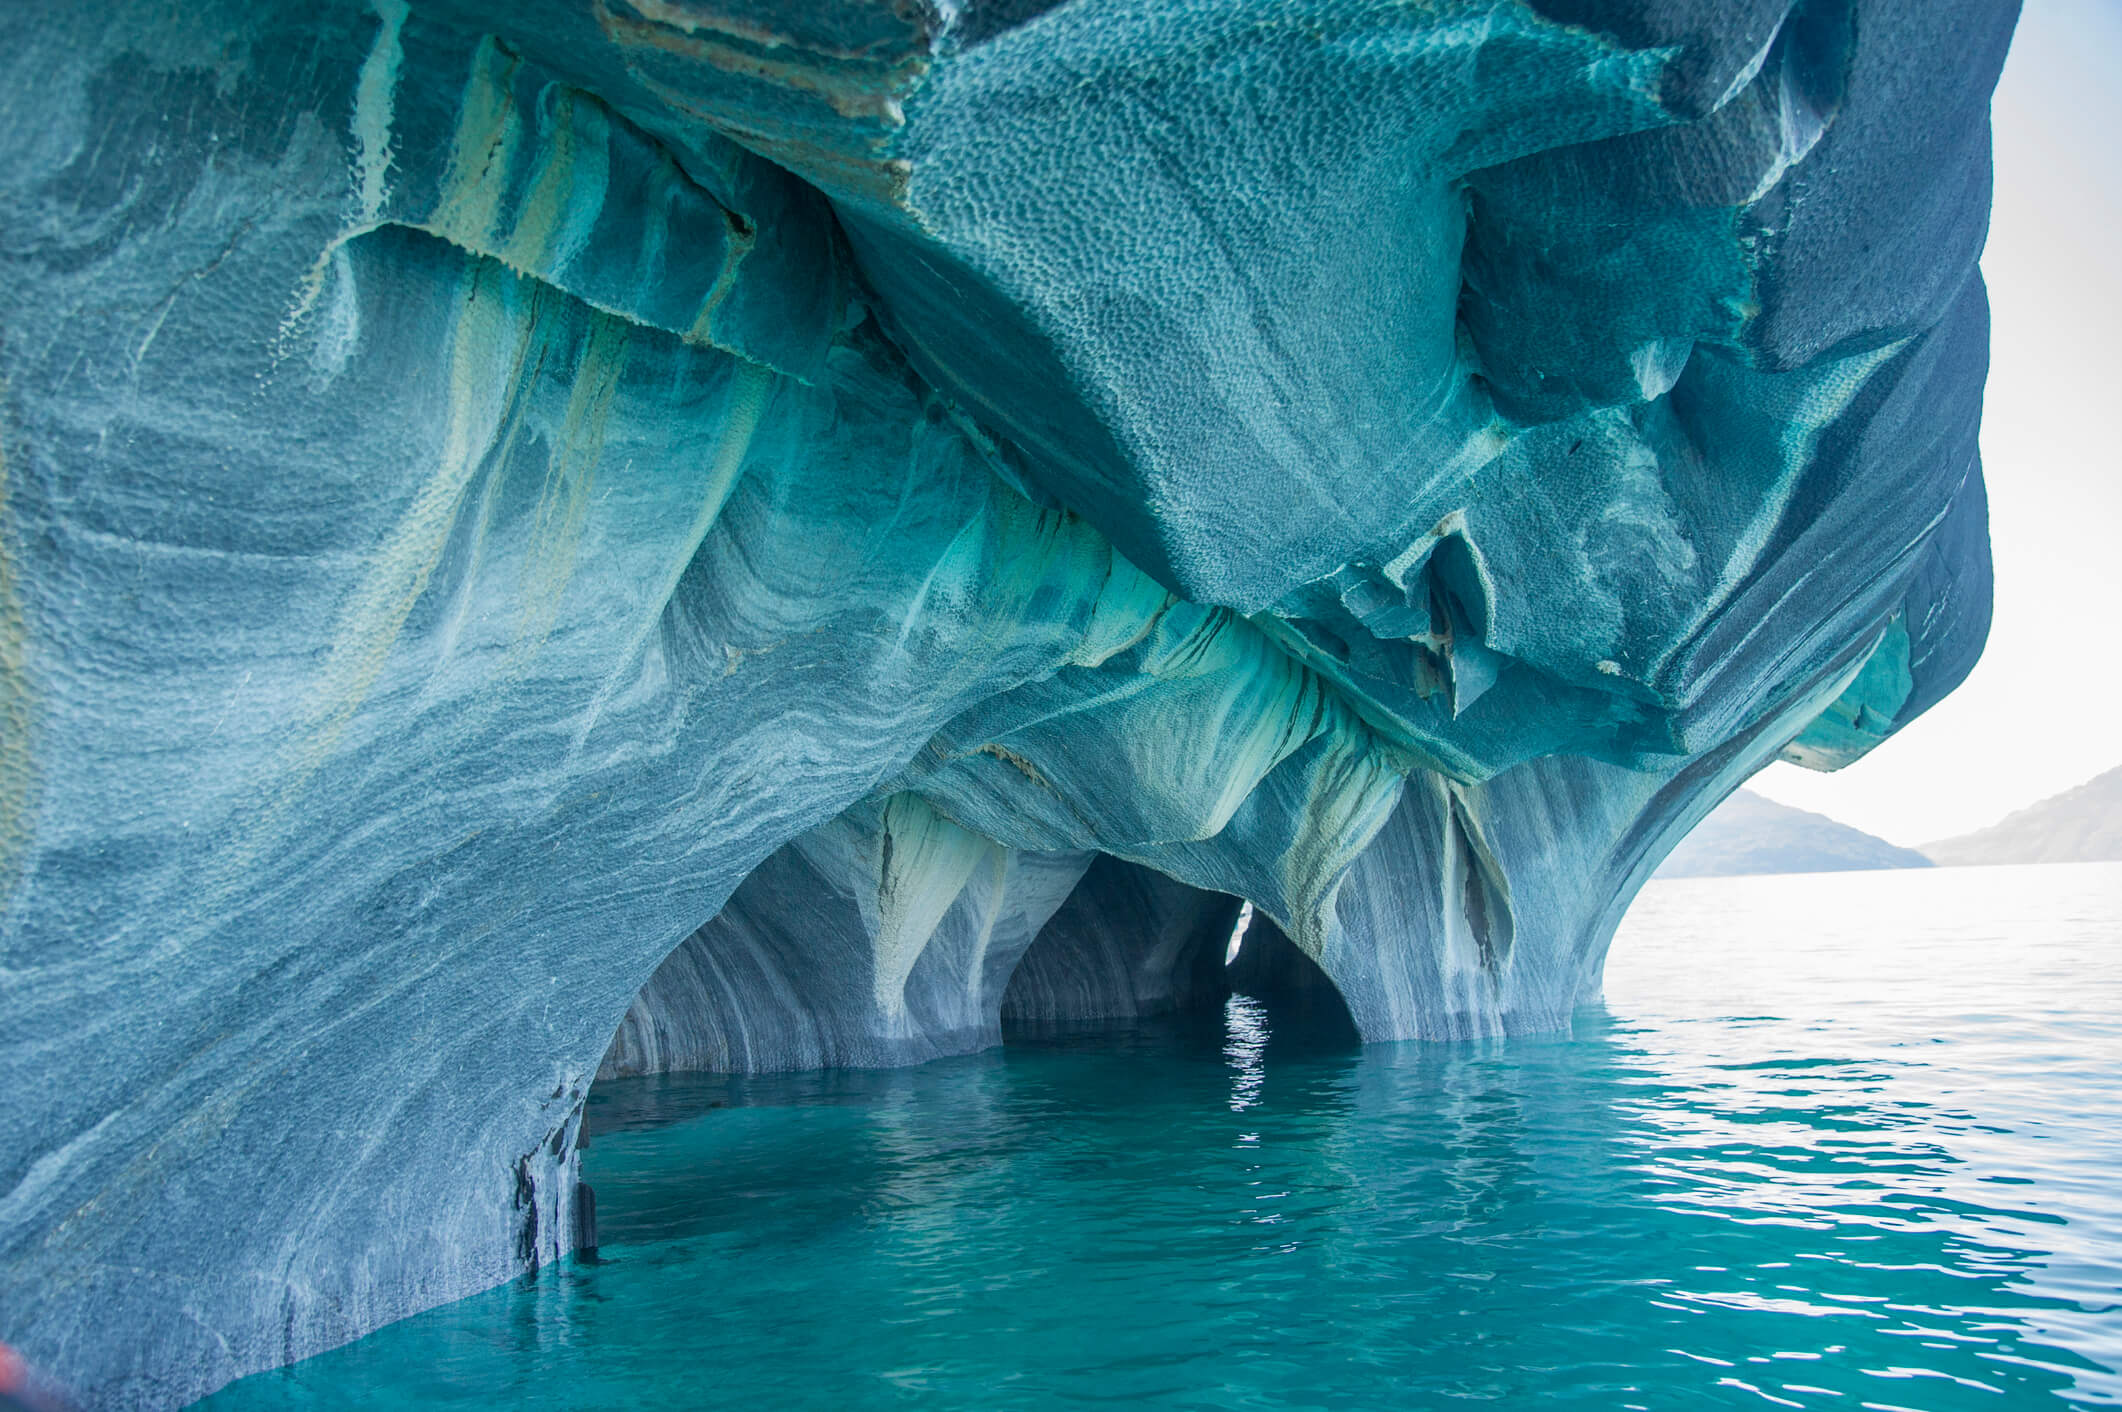 Seaside caves of marble carved out by lapping water. 